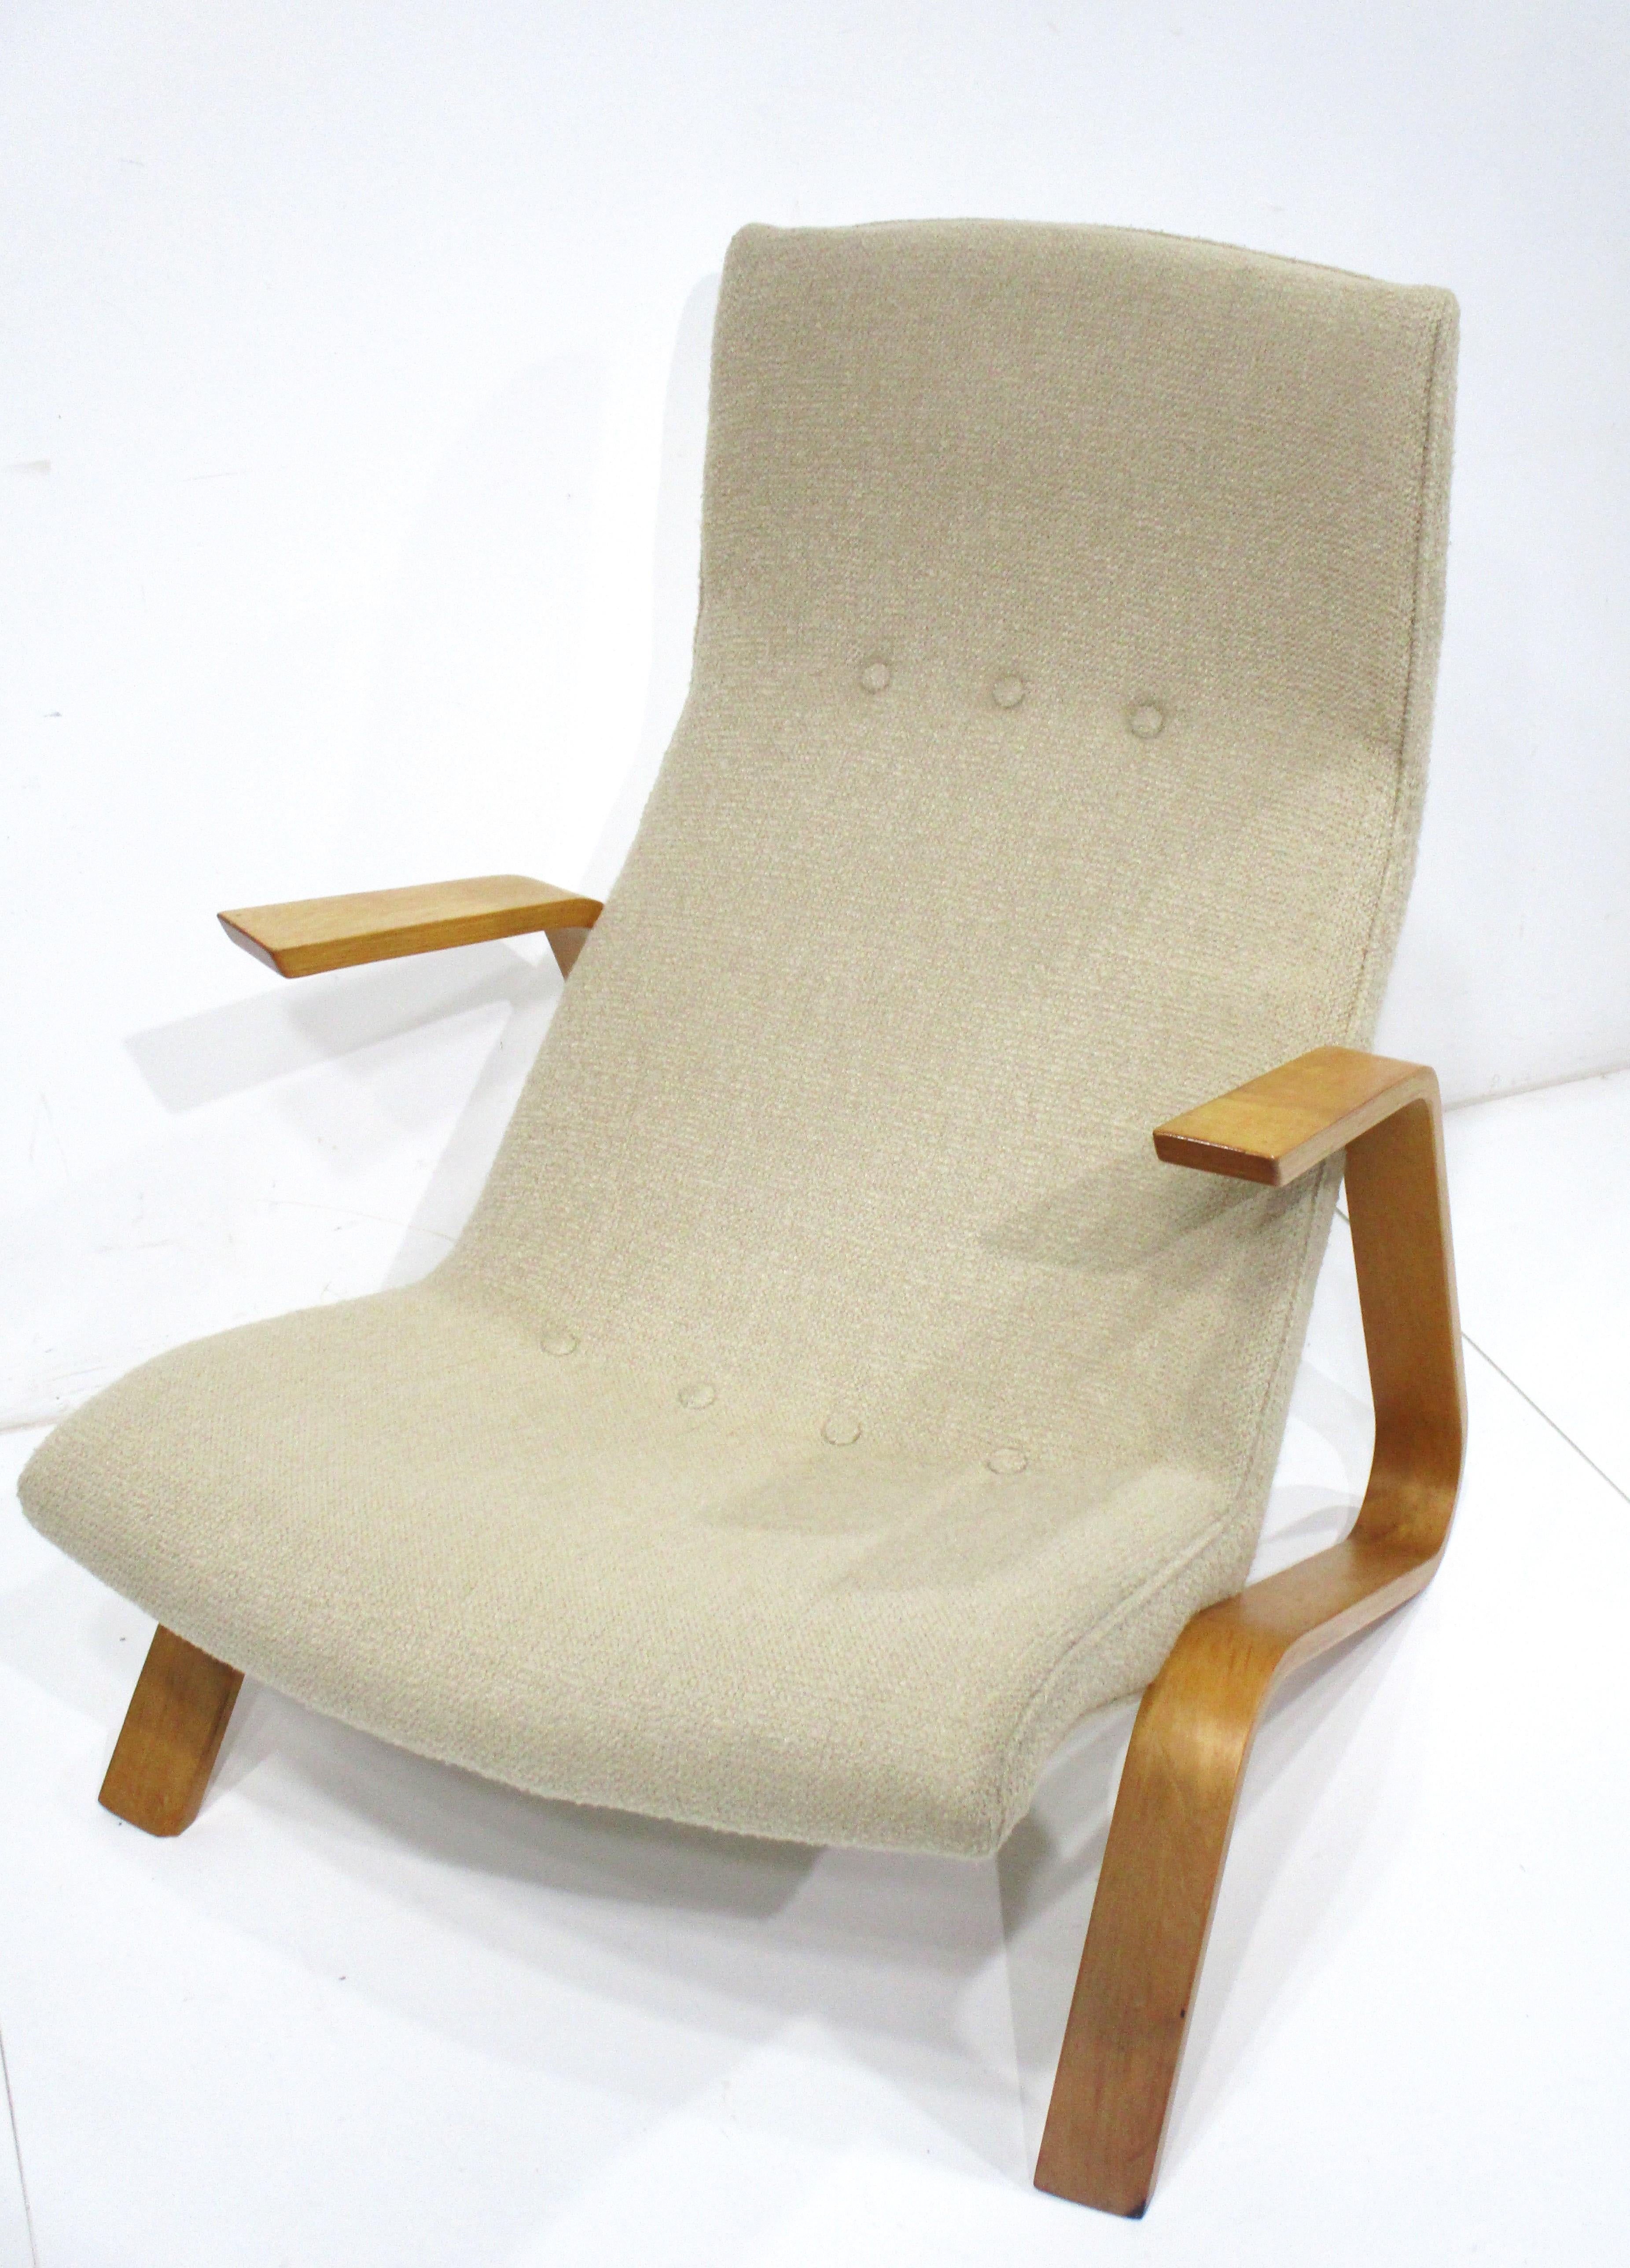 Upholstery Early Eero Saarinen Grasshopper Lounge Chair for Knoll  For Sale